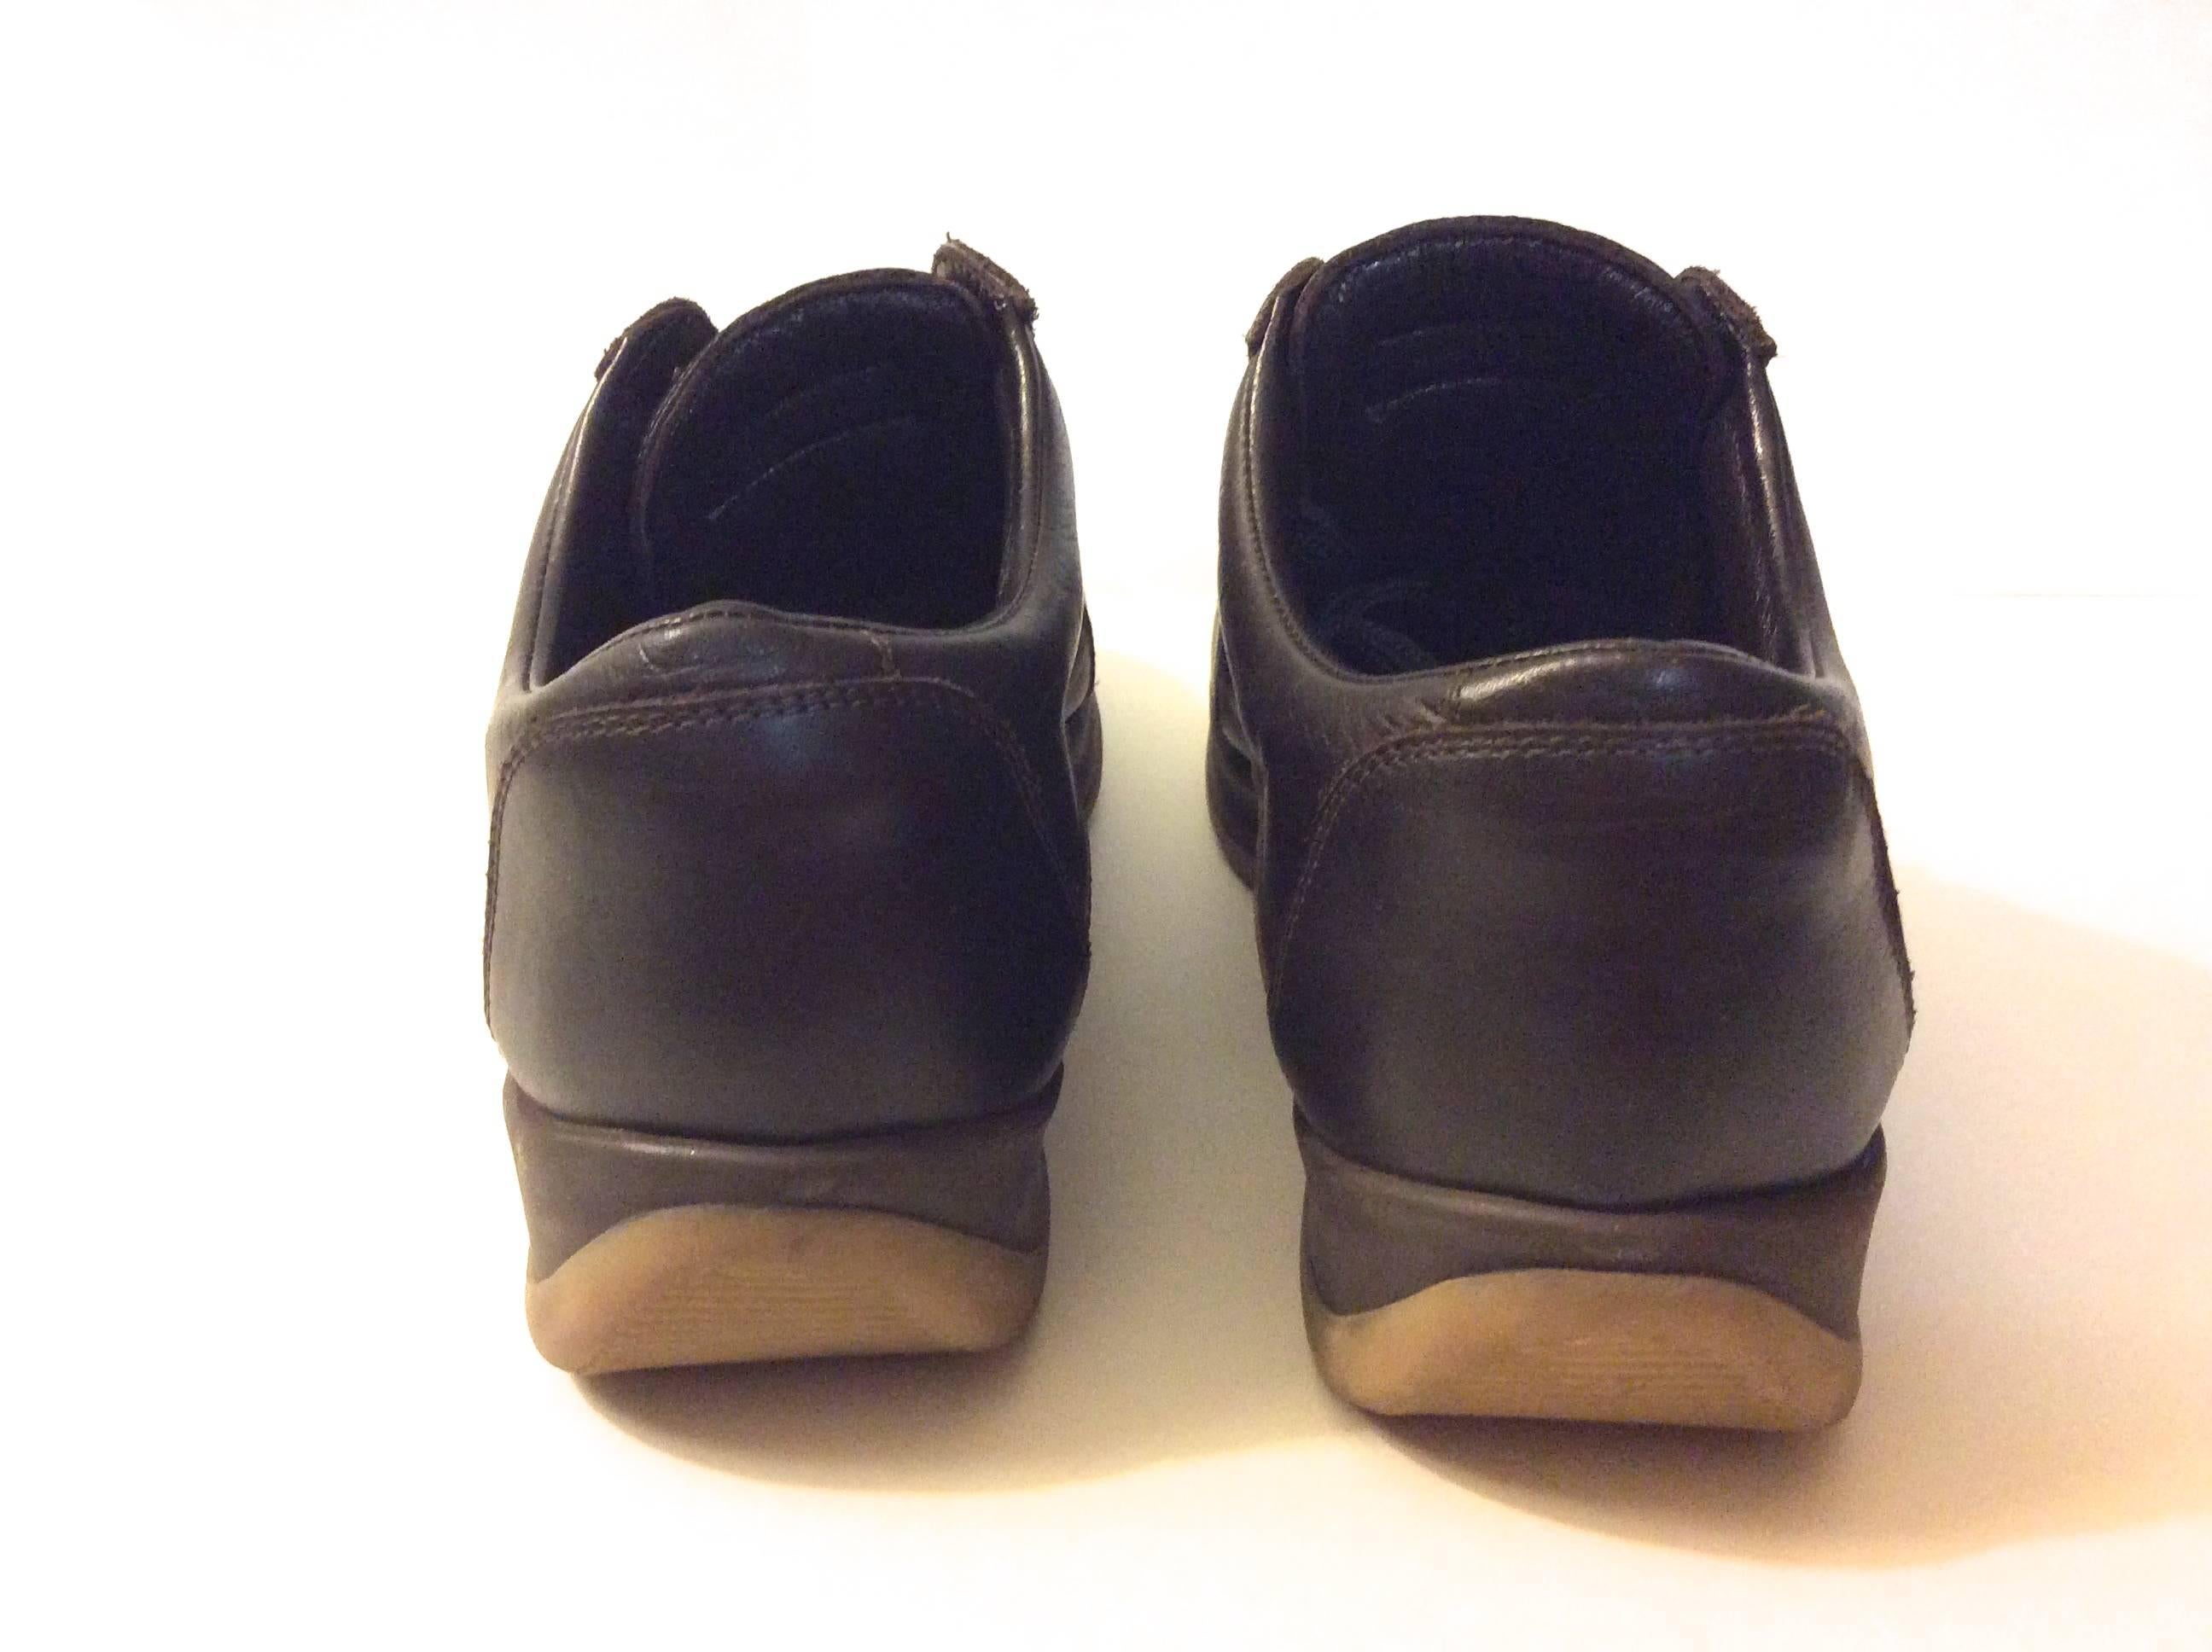 You are looking at a beautiful pair of ladies Louis Vuitton brown leather shoes with rubber sole. Size is equivalent to a size 7.5 / 8 despite sizing label stating 39.5. They have brown laces. The shoes are 10 inches long. The back of the sole turns